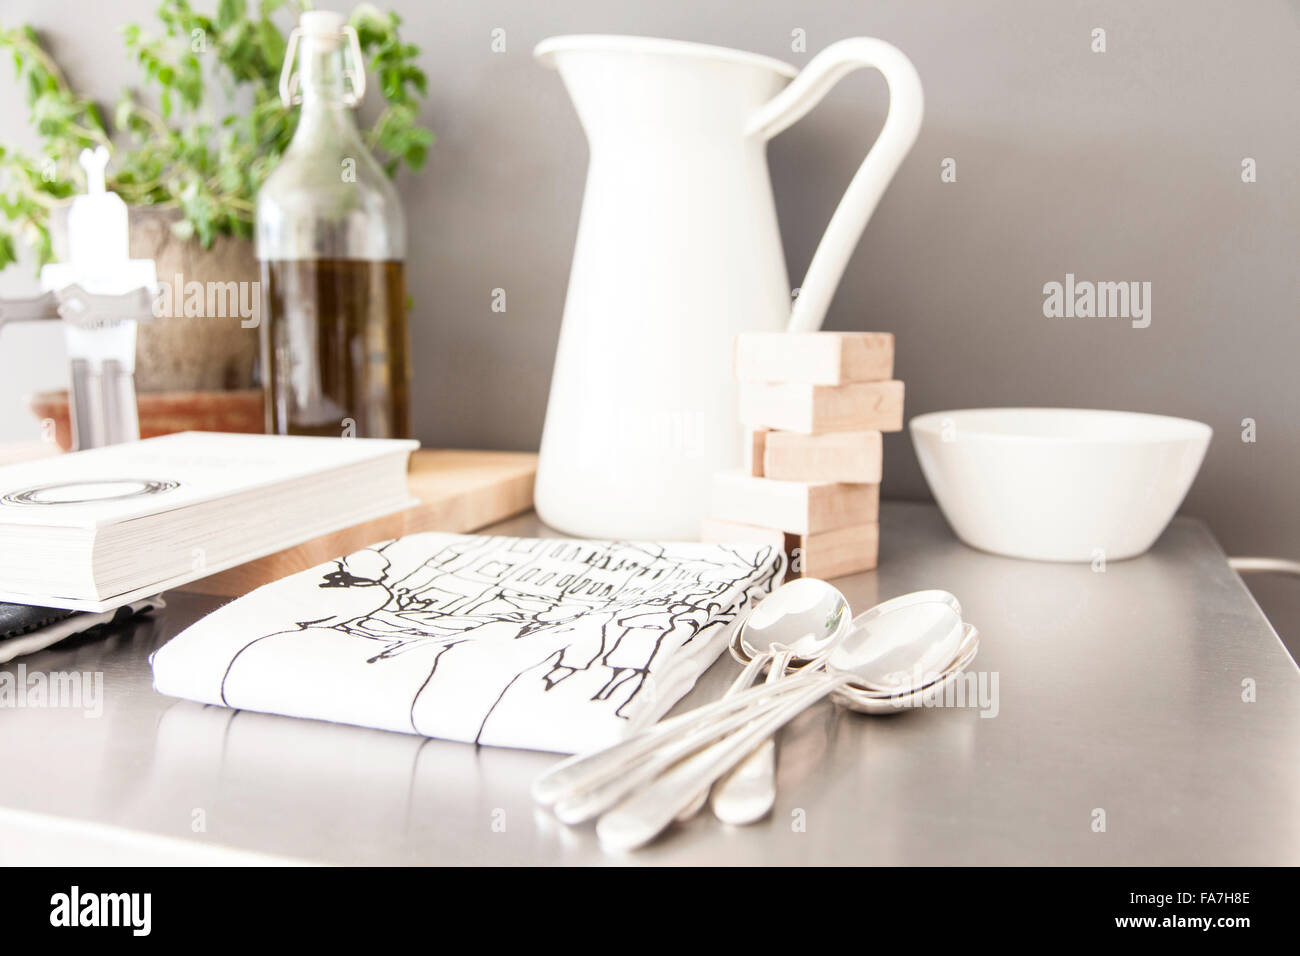 Kitchen trolley A house combining modern minimalist style with display of traditional objects used in every day life. Stock Photo